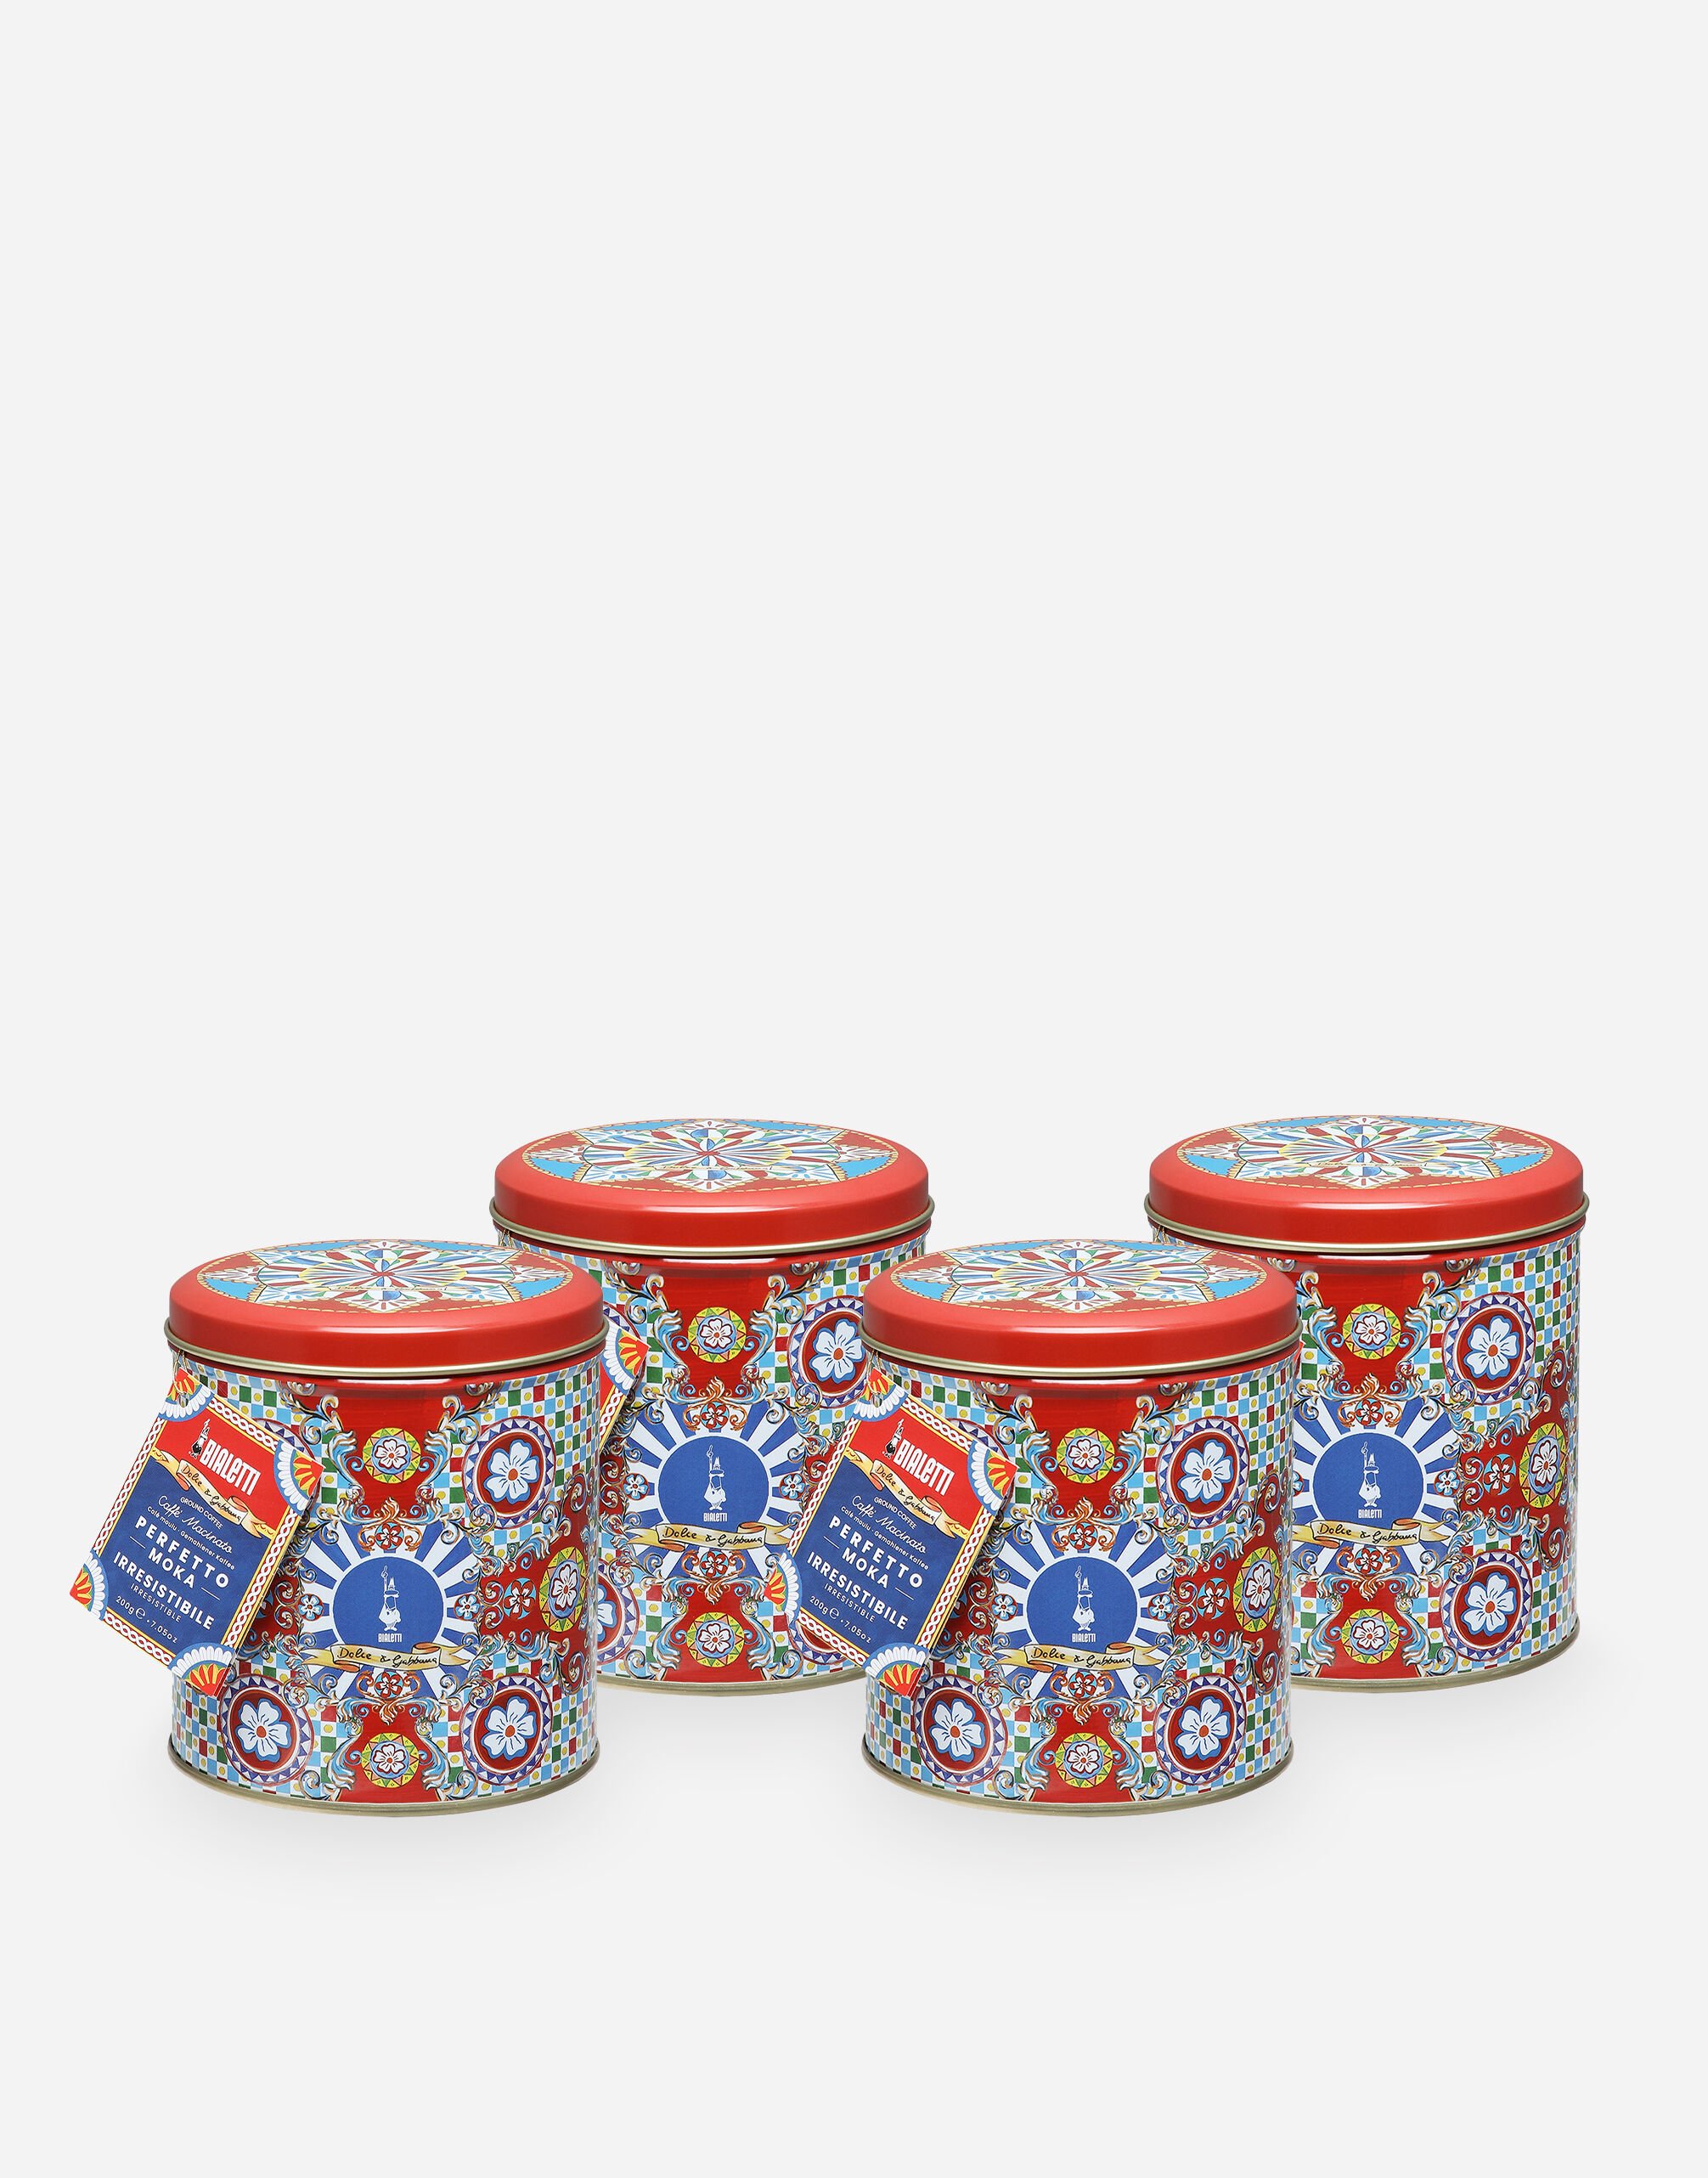 ${brand} 4 Coffee Canisters BIALETTI DOLCE&GABBANA ${colorDescription} ${masterID}